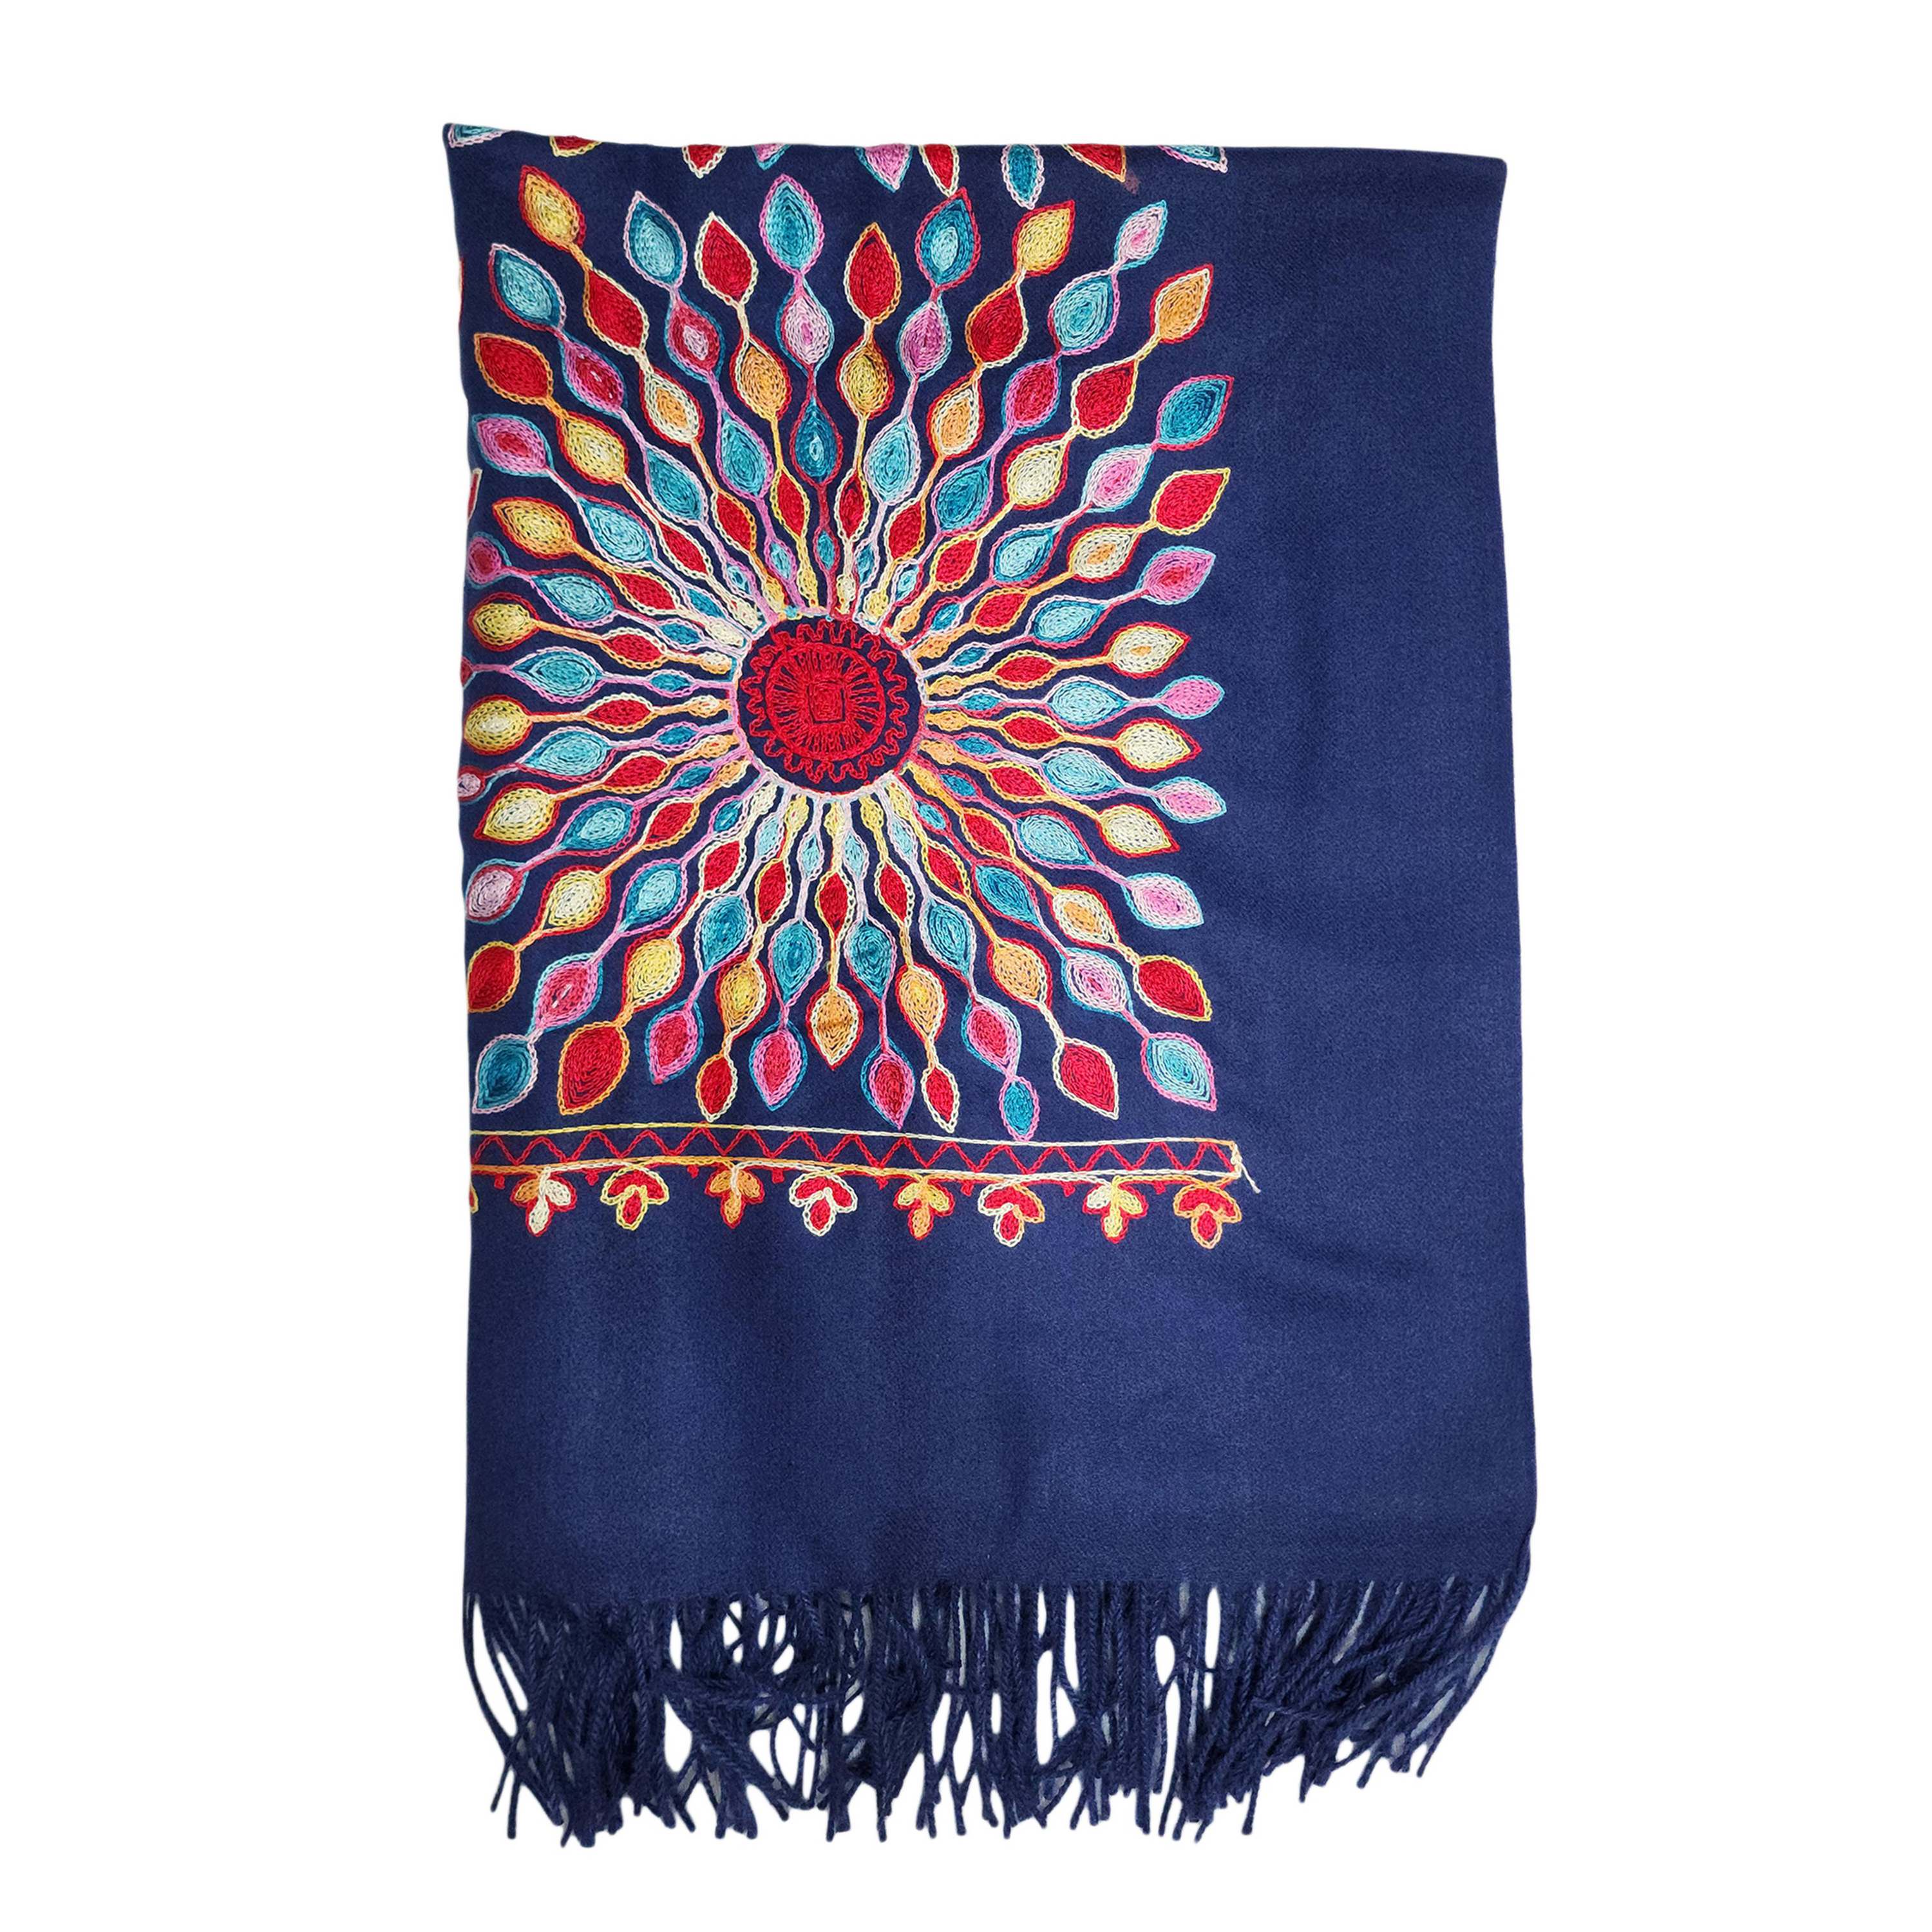 Desigener Shawl, Thick Nepali Shawl, With Heavy Embroidery, Color blue